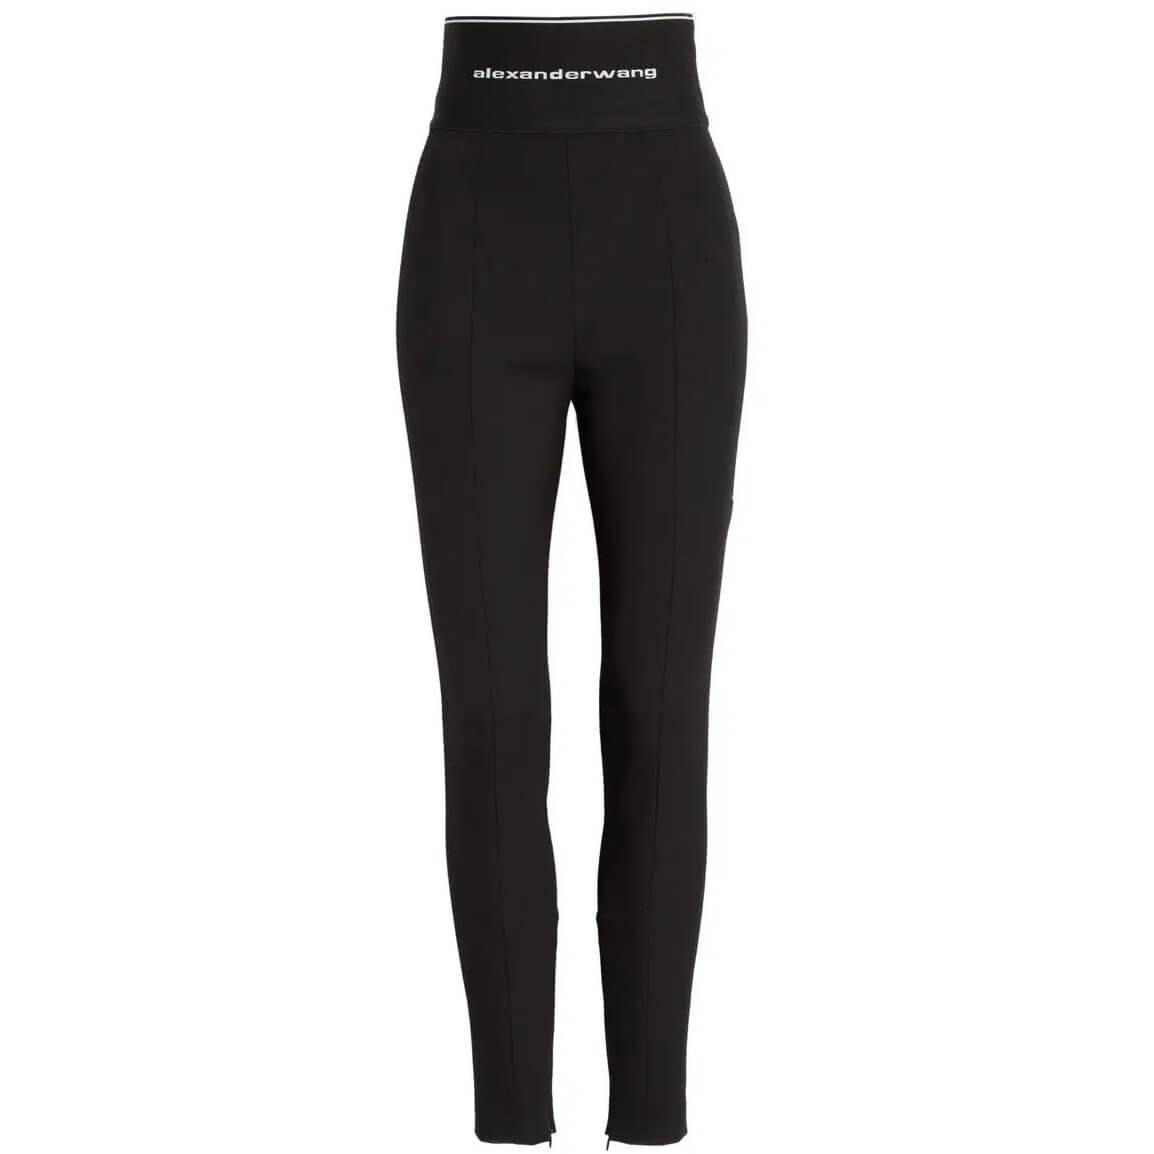 wang leggings - OFF-57% >Free Delivery